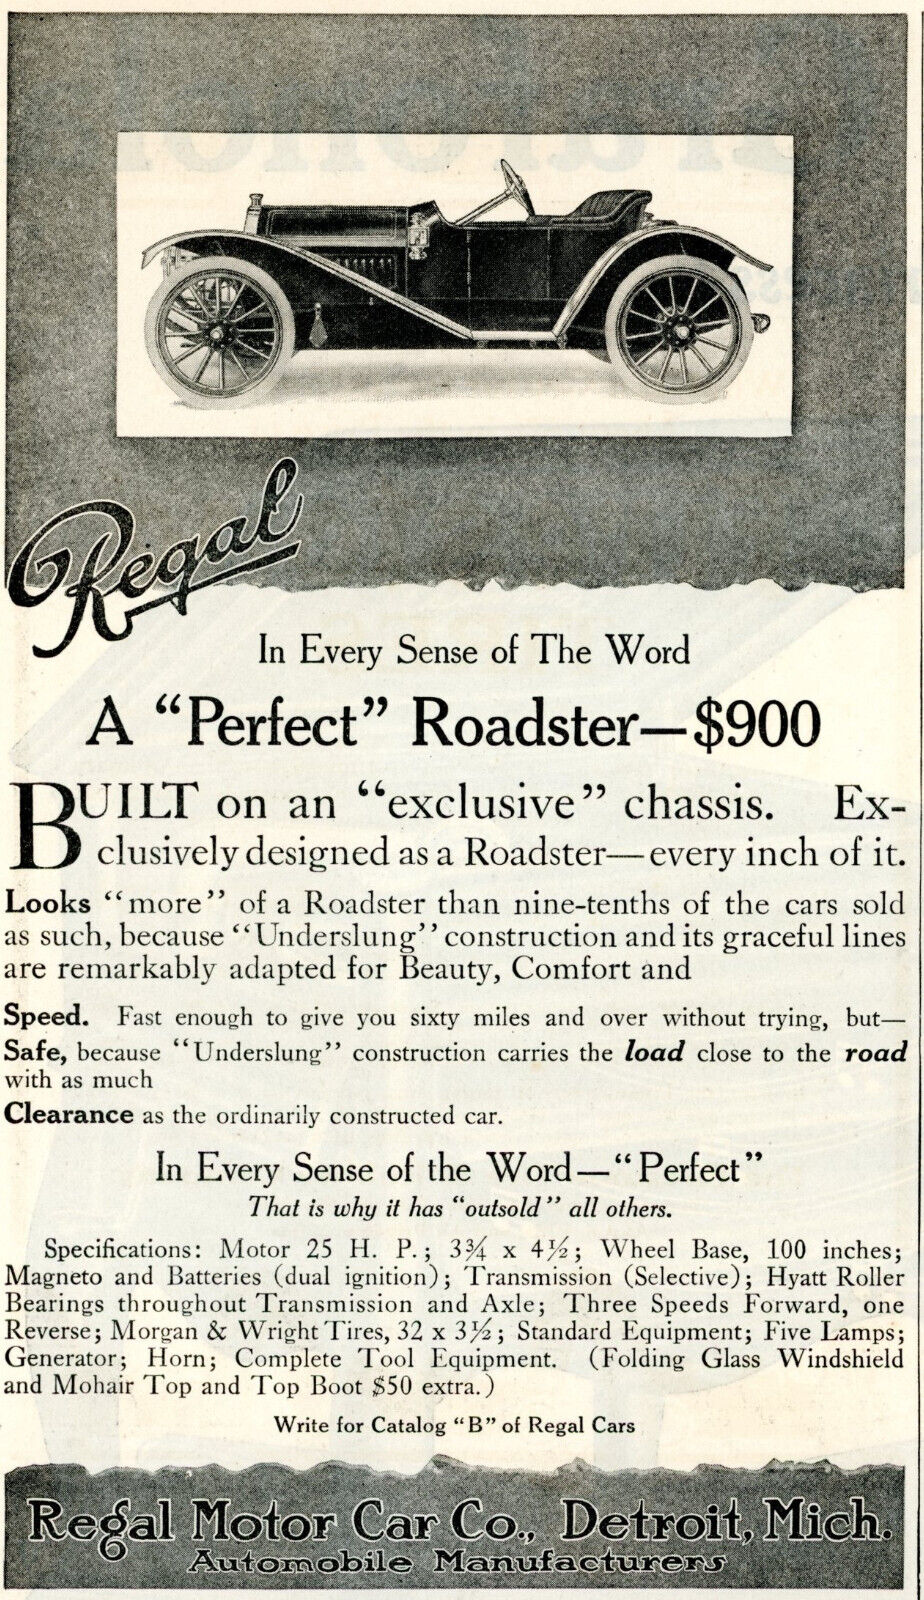 1912 Original Regal Roadster Ad. Exclusive Chassis Designed For Roadster Only